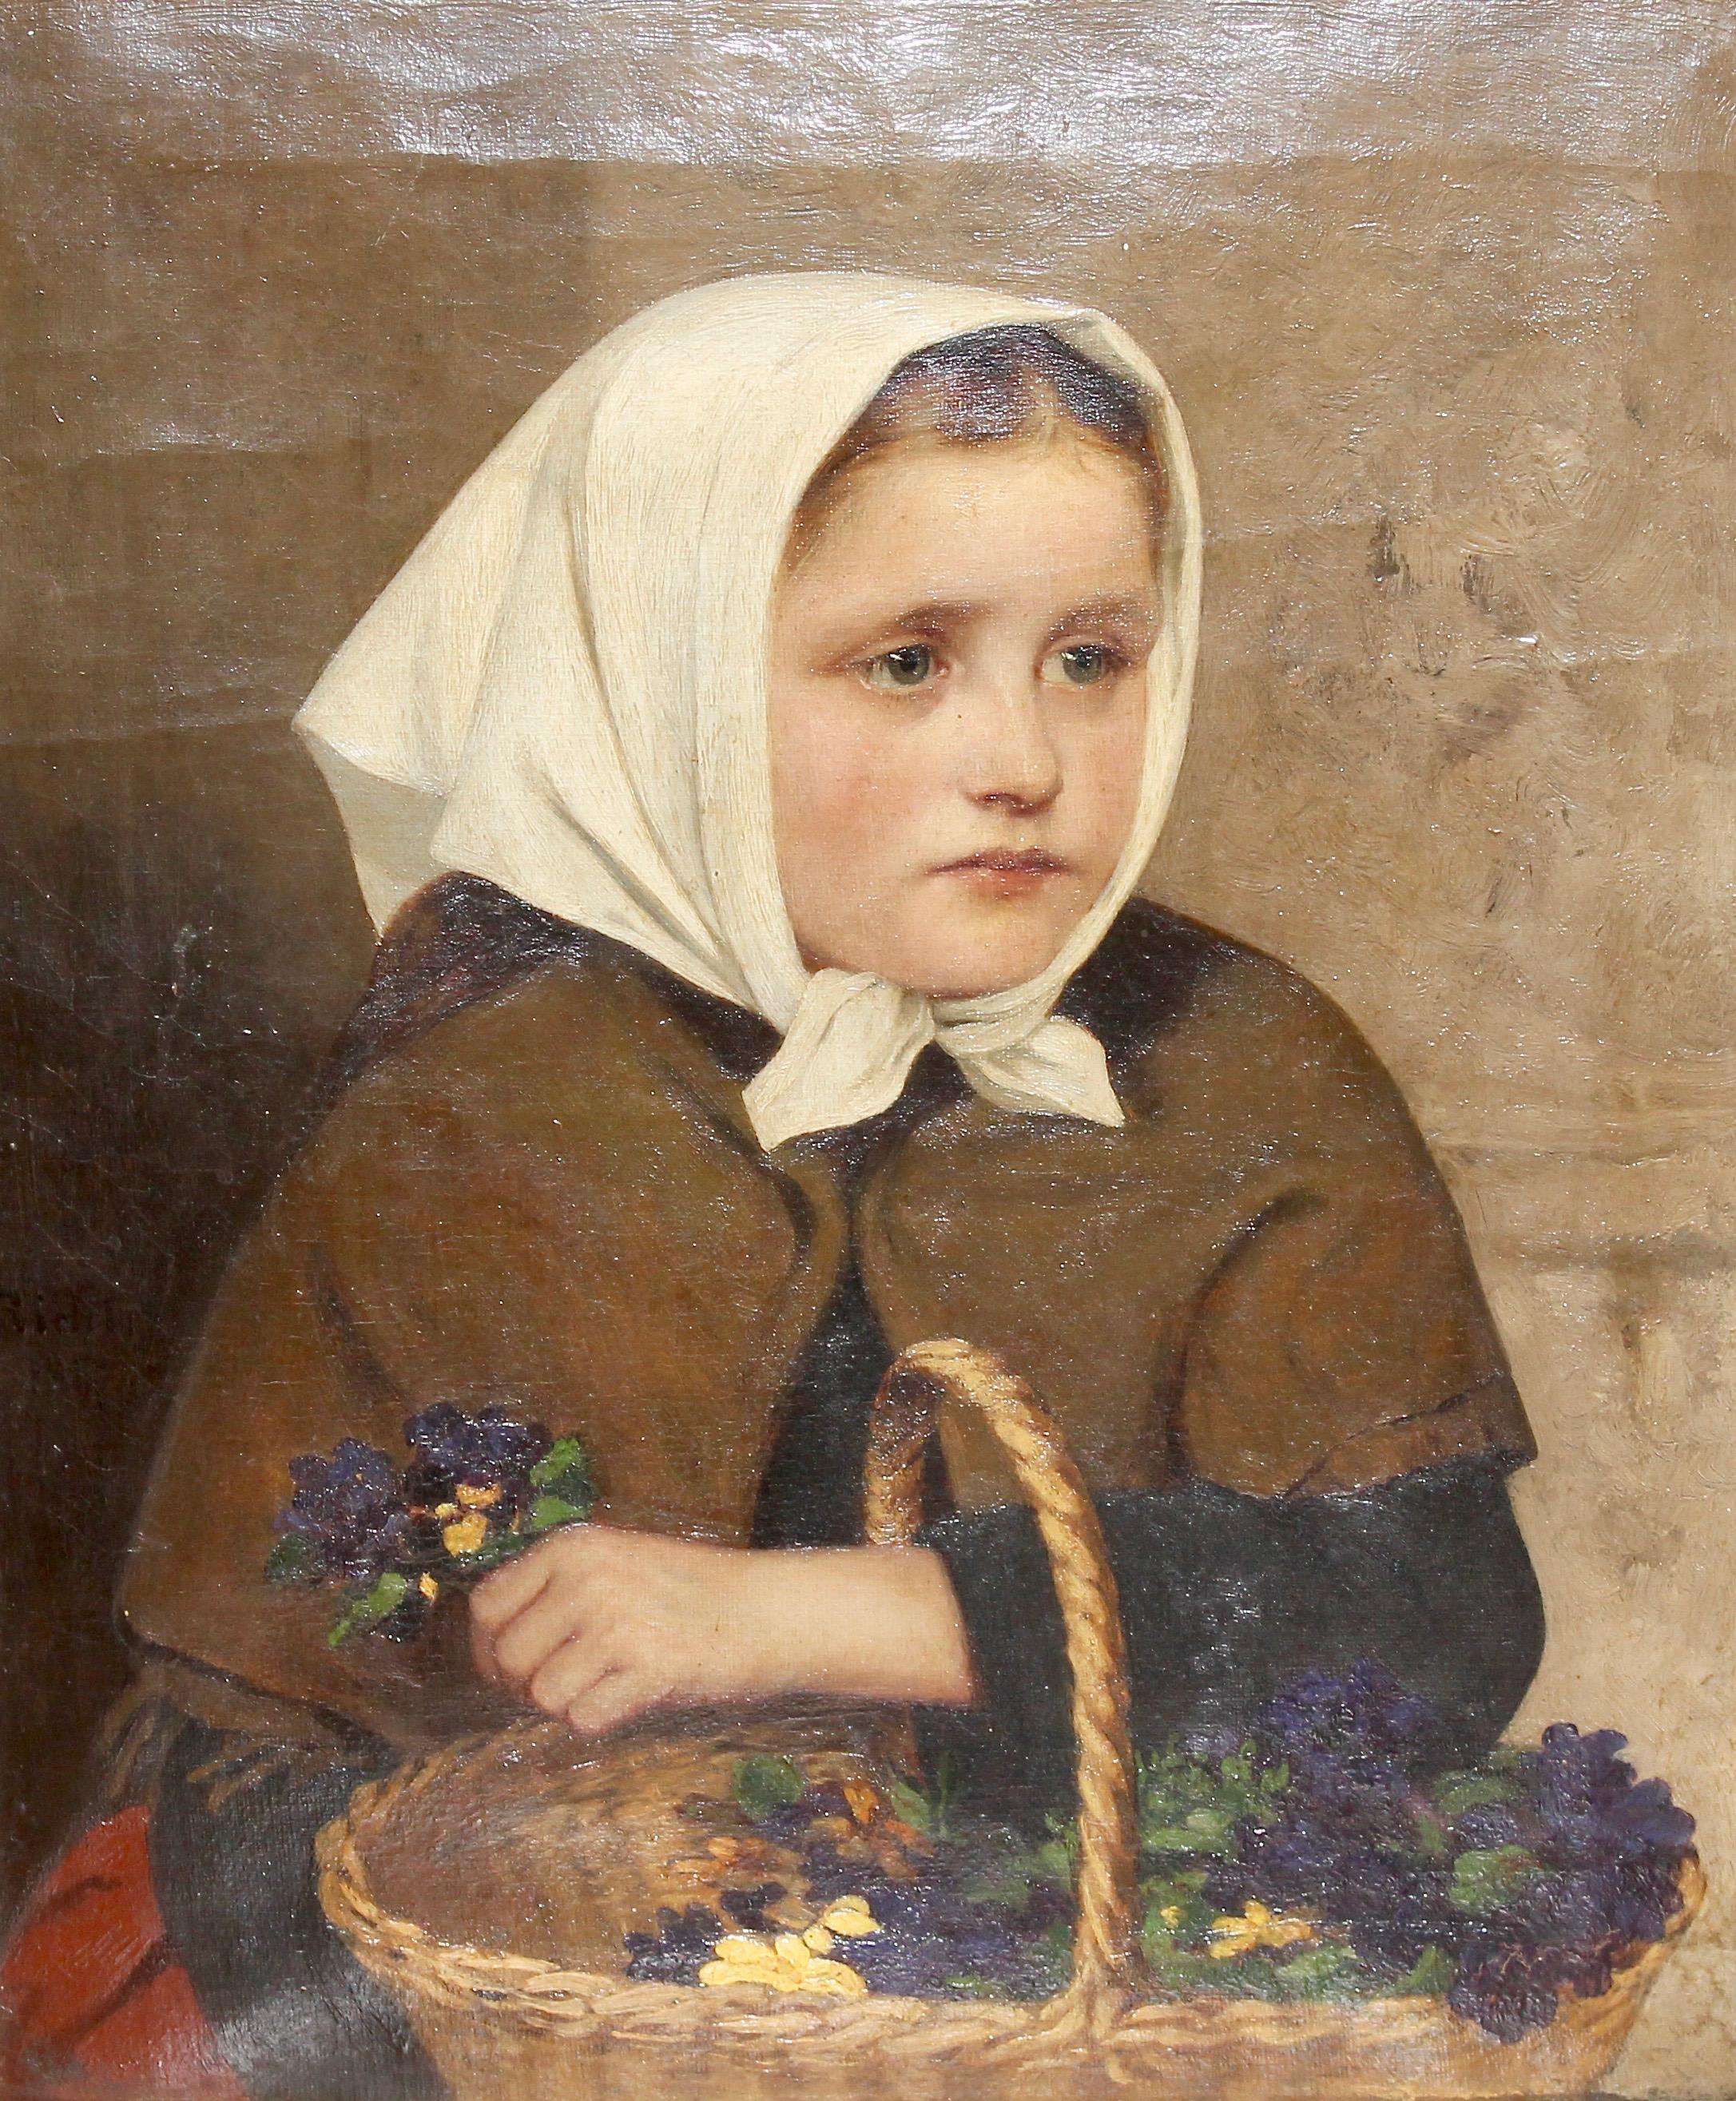 Painting, 19th Century, oil on canvas, "Young Girl with Flower Basket" 